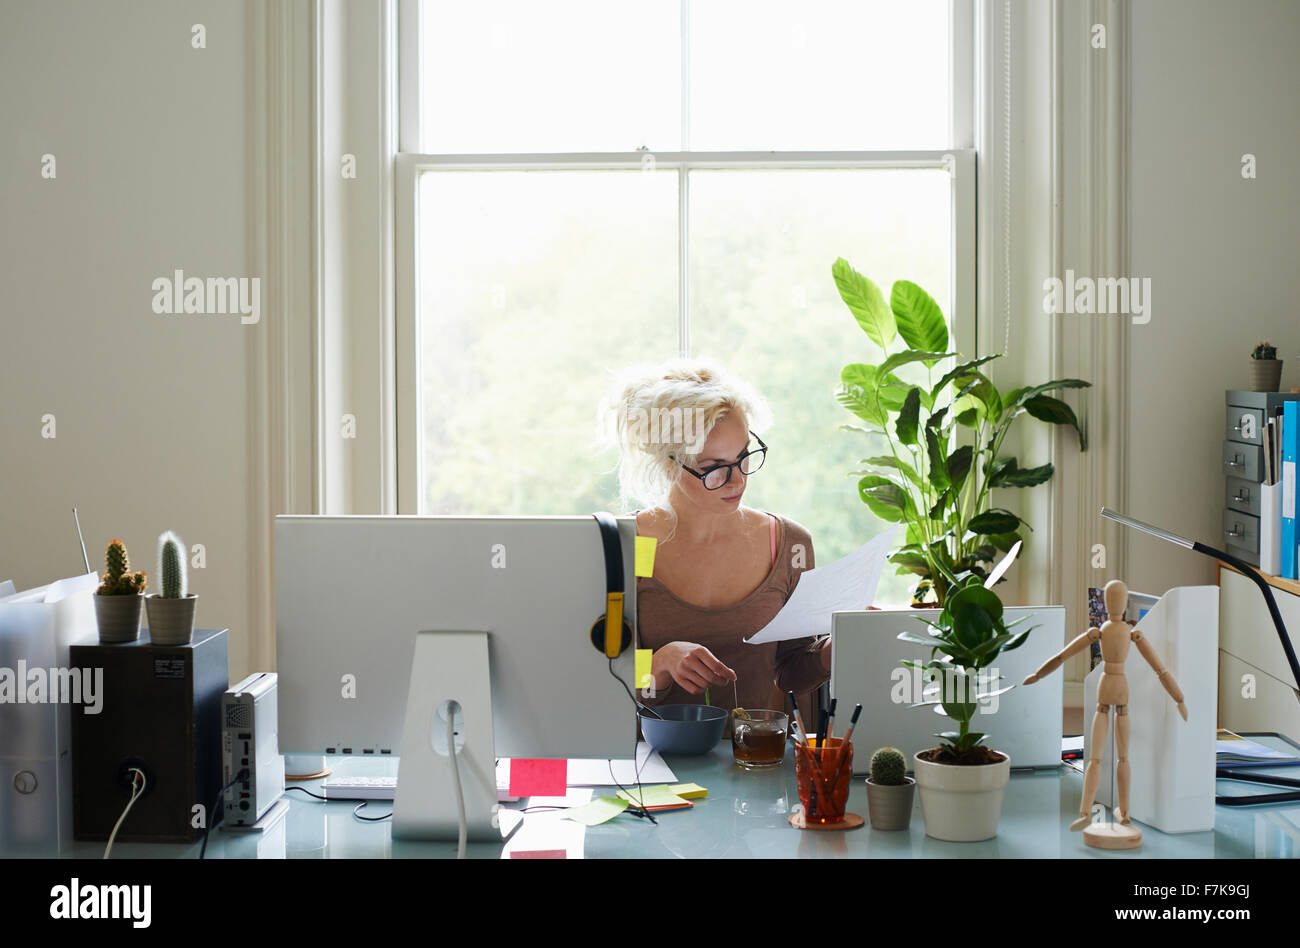 Young woman reading paperwork at desk in office Banque D'Images